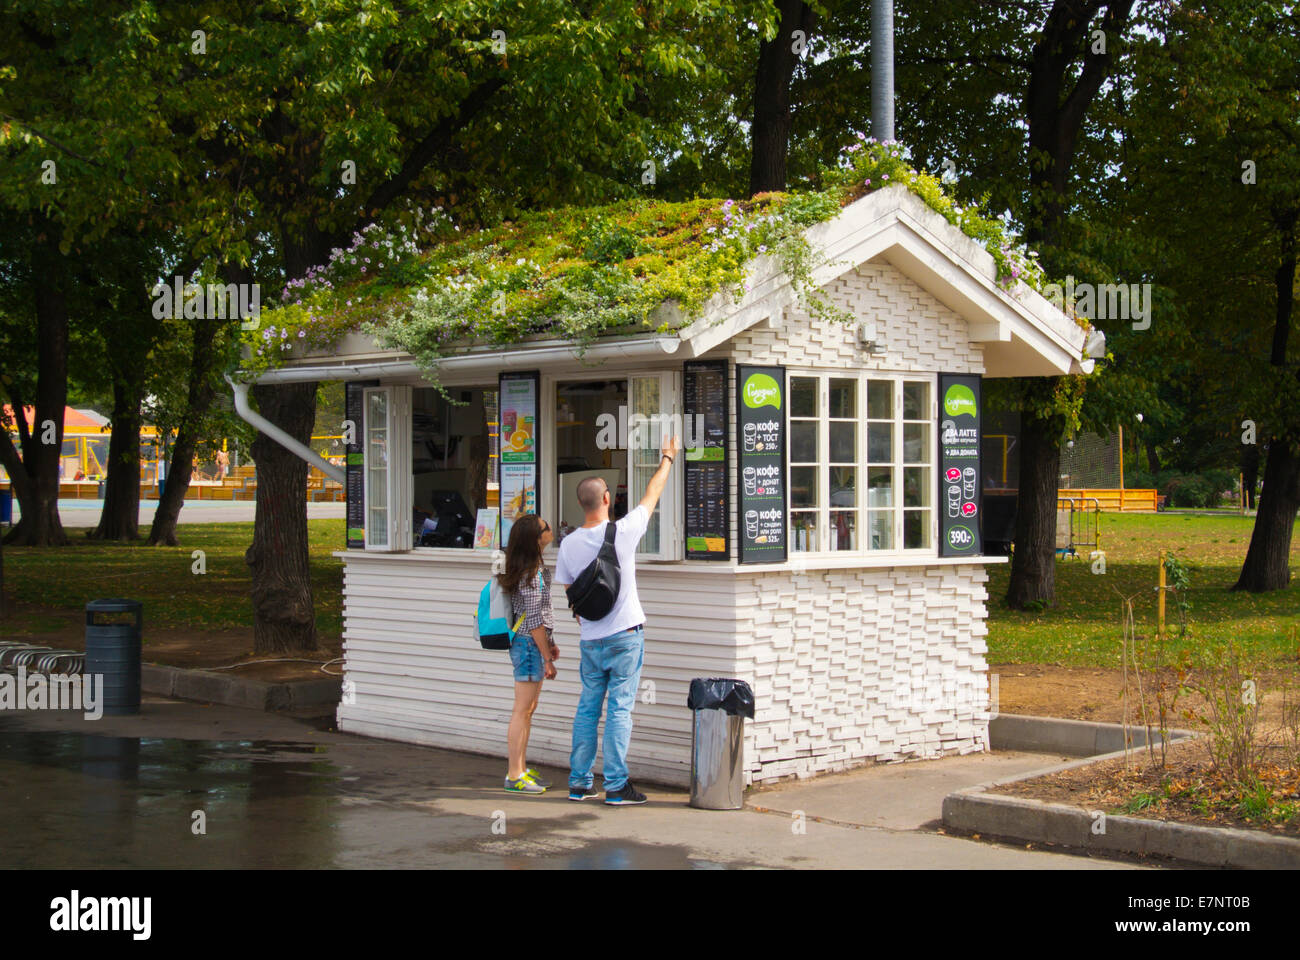 Drink and snack kiosk, Gorky Park, Moscow, Russia, Europe Stock Photo